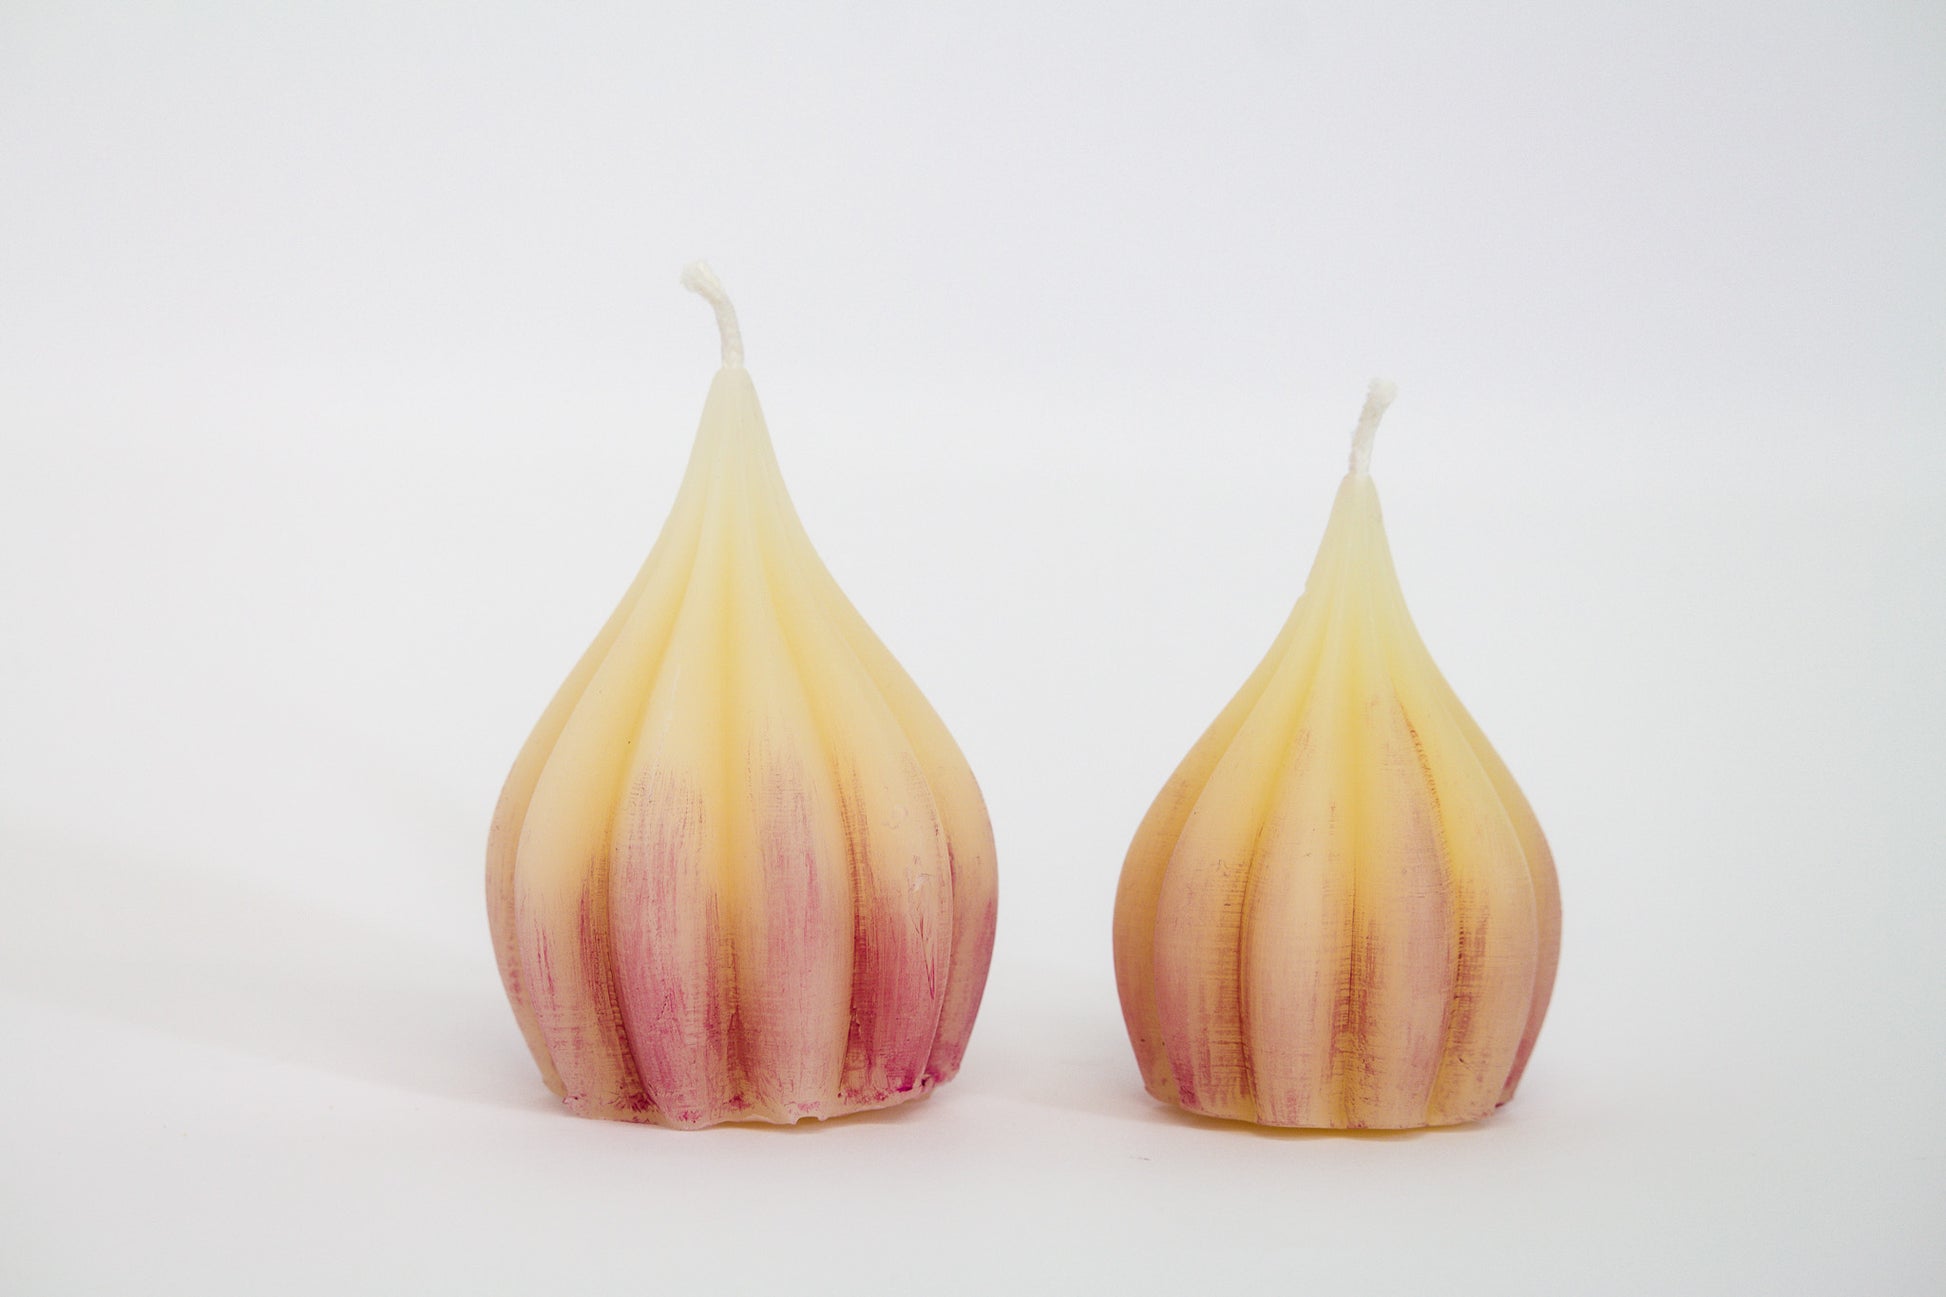 One large and one small pure white beeswax candle with purple tint on white background